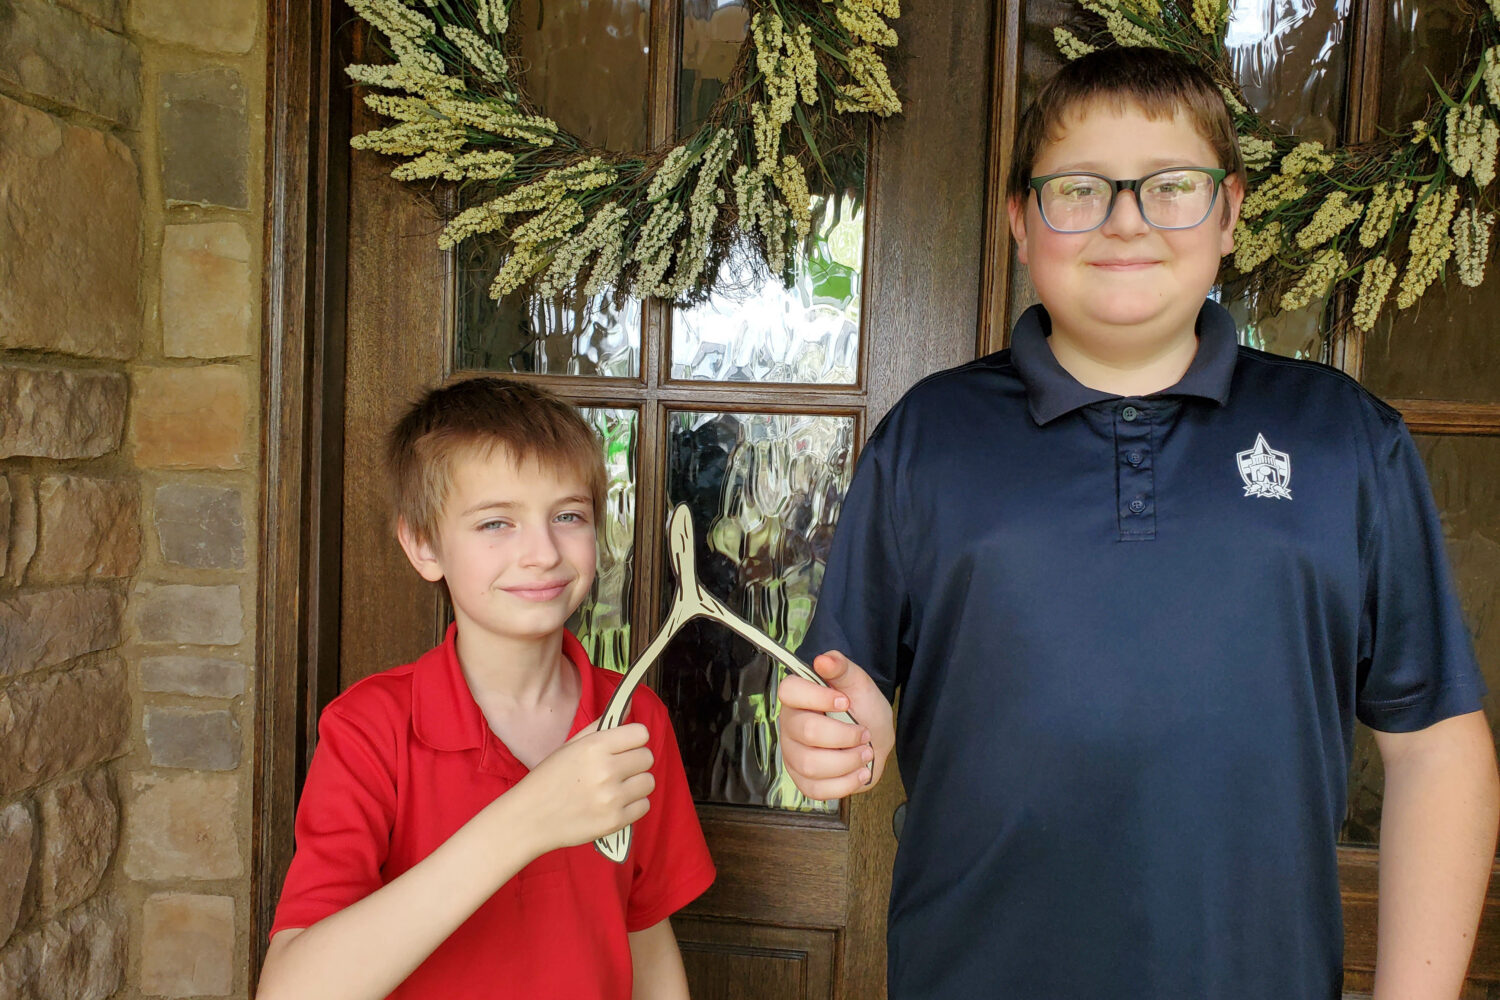 Thanksgiving Break a Wishbone fun singing time idea for November! Or, a great family activity for your Thanksgiving gatherings - the kids will love their chance to break a wishbone, too! Printable song helps for LDS Primary music leaders.